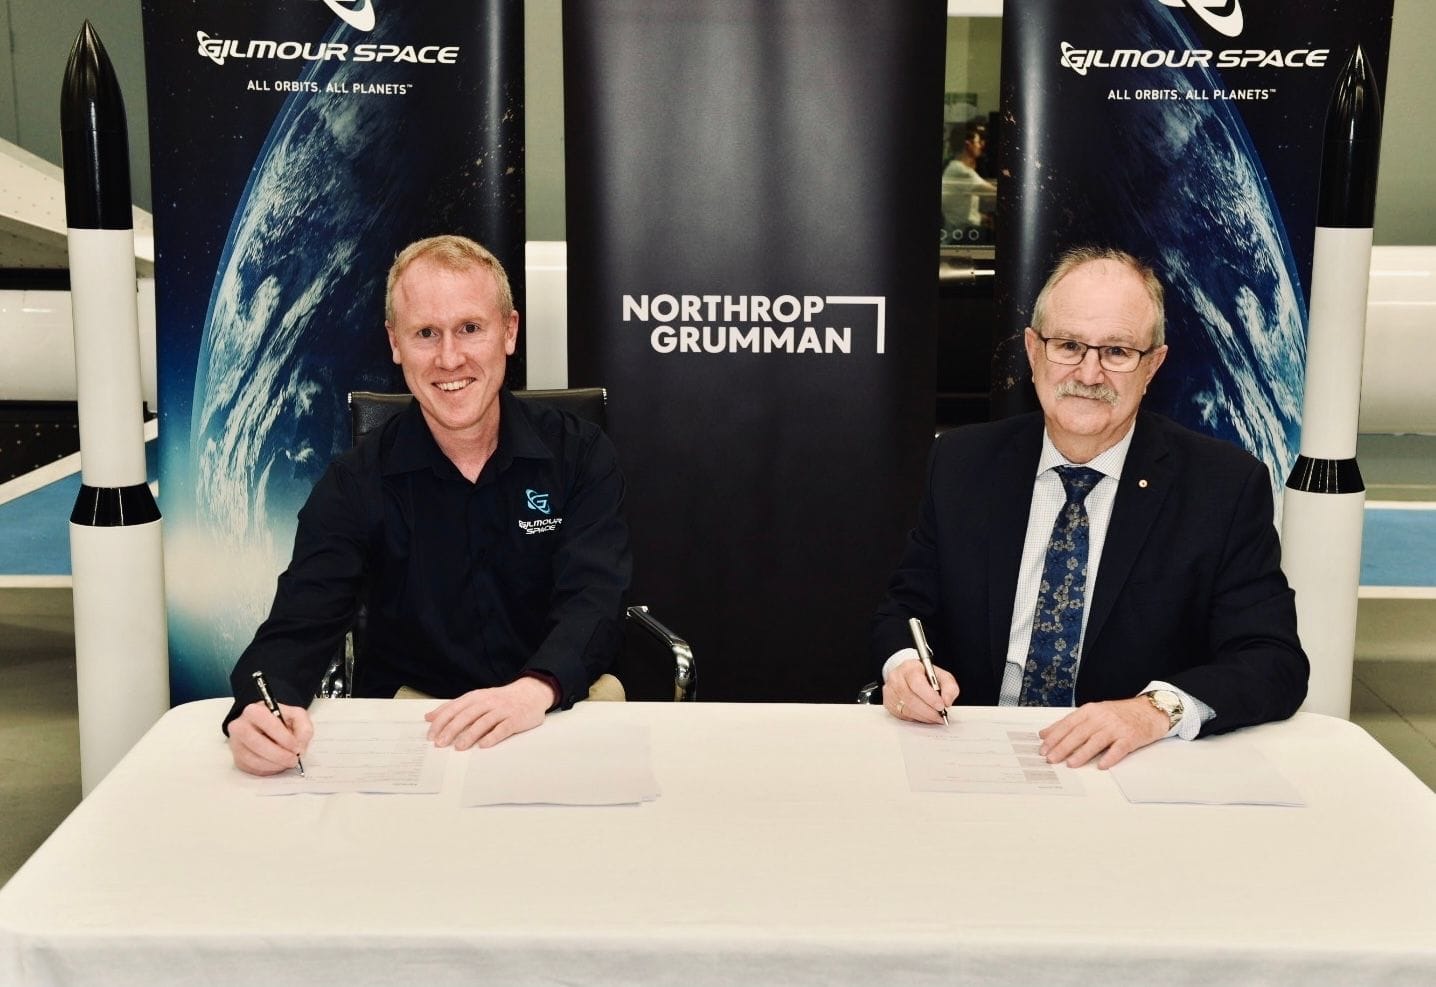 Gilmour Space partners with military giant Northrop Grumman to grow Aussie space sector